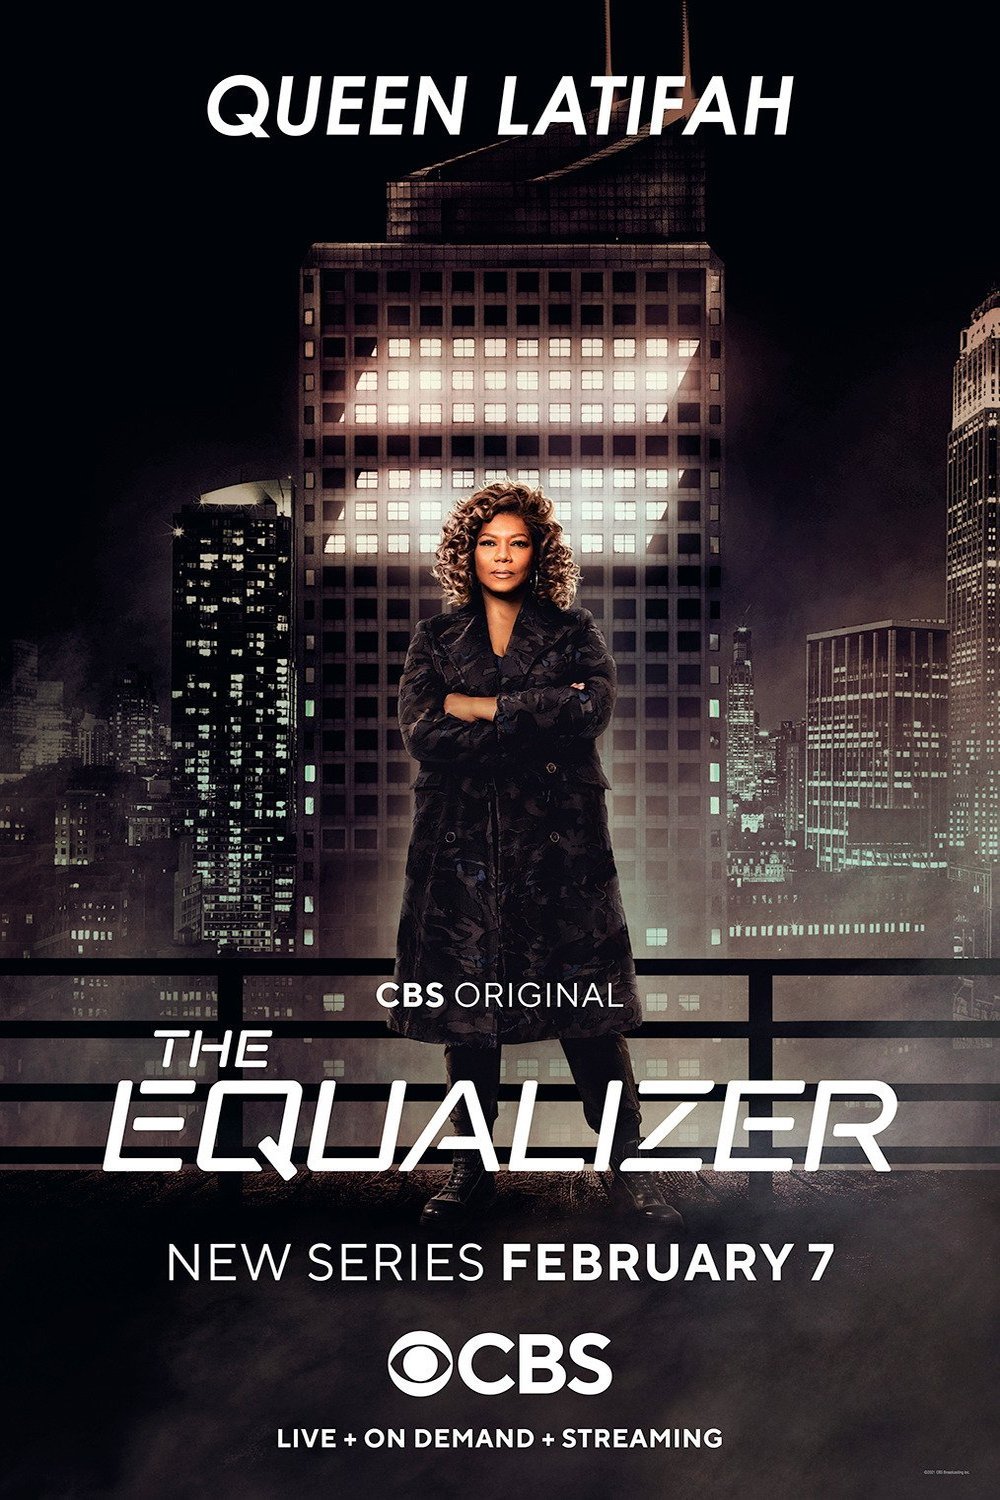 The Equalizer TV series